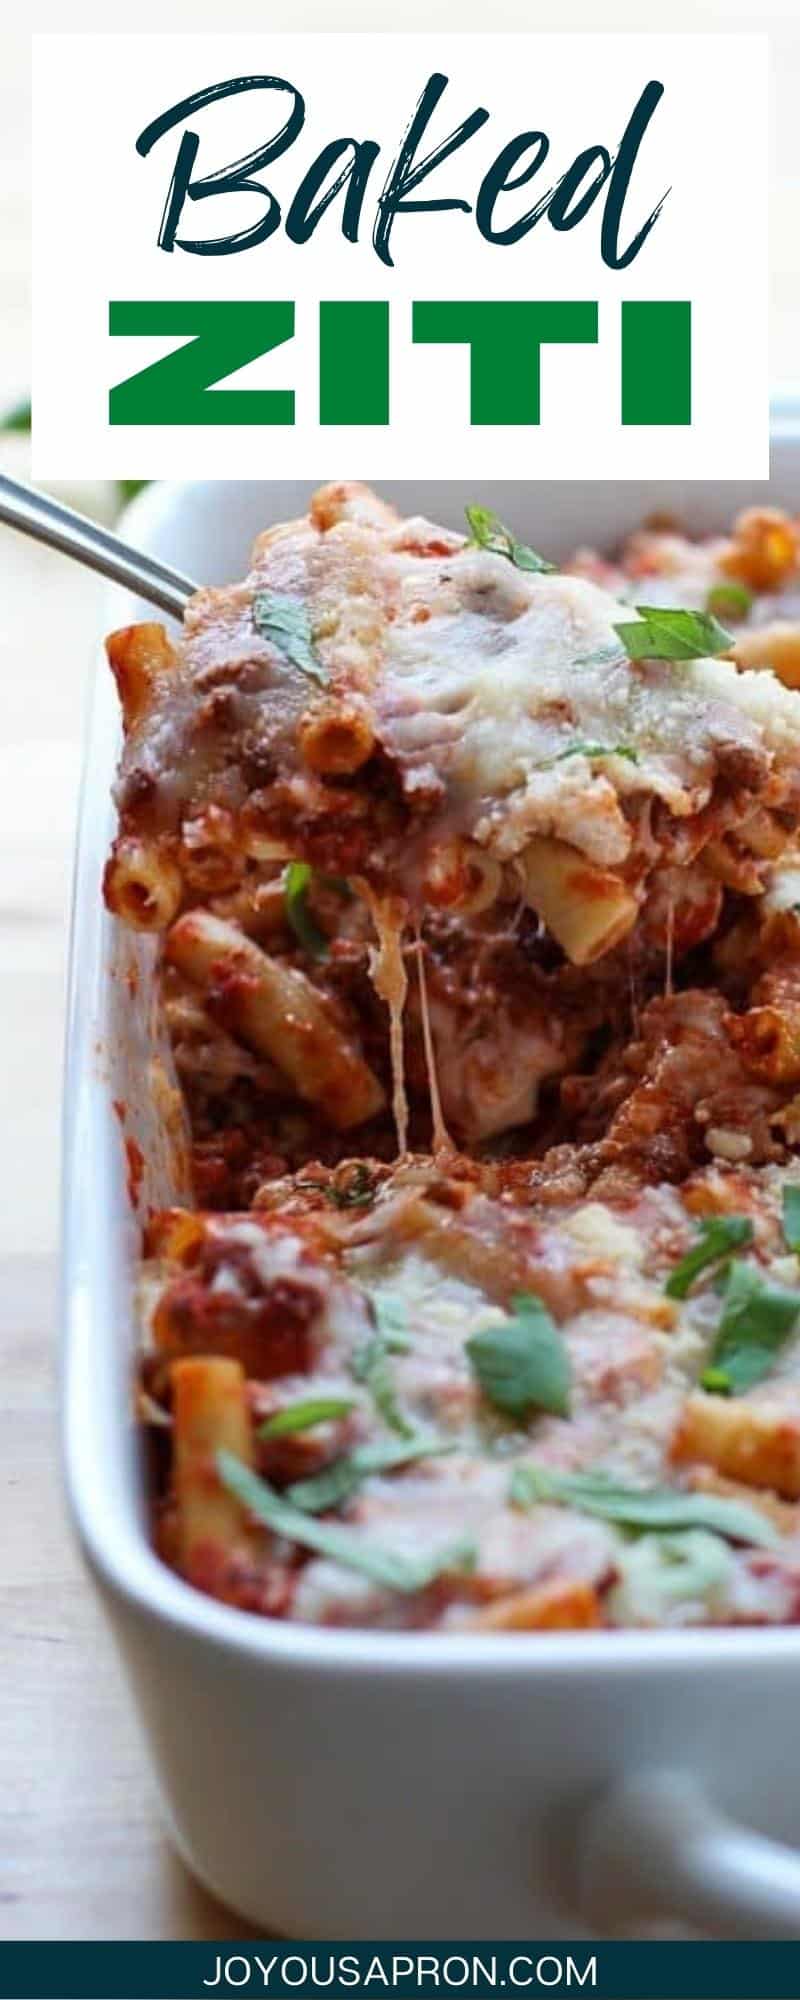 Baked Ziti - Ziti pasta baked with delicious ground beef meat sauce and ricotta cheese. An Italian comfort food recipe for busy weeknights, potlucks, and parties! via @joyousapron